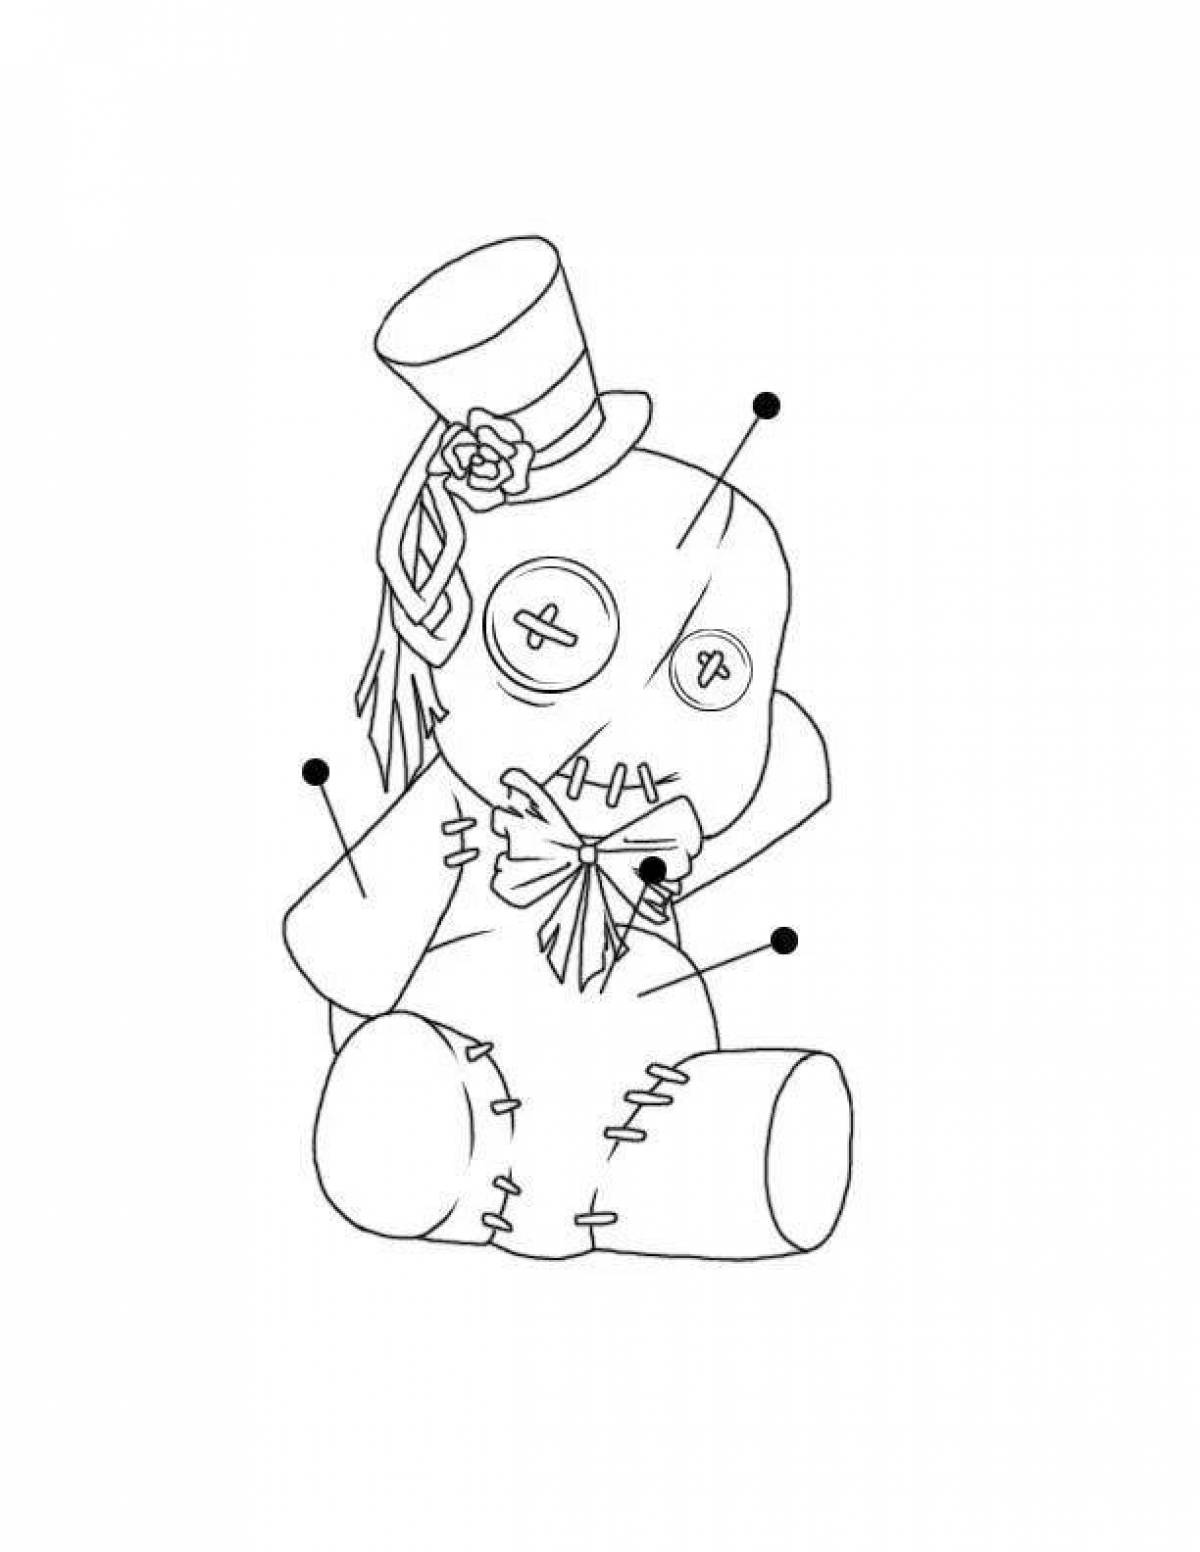 Awesome voodoo doll coloring page